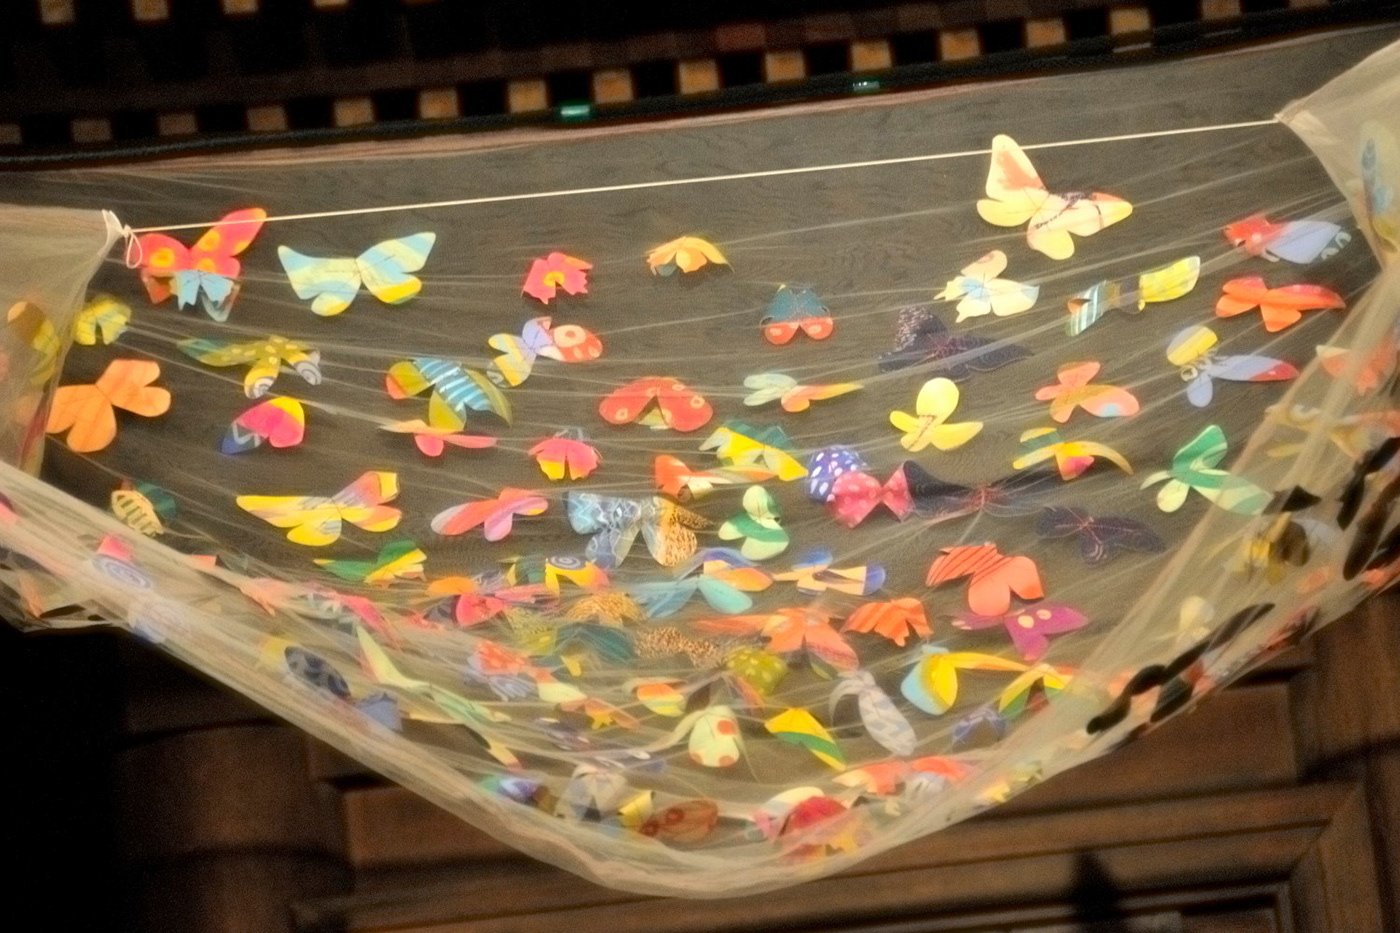 scenography of a concert, with butterflies of light and shadow